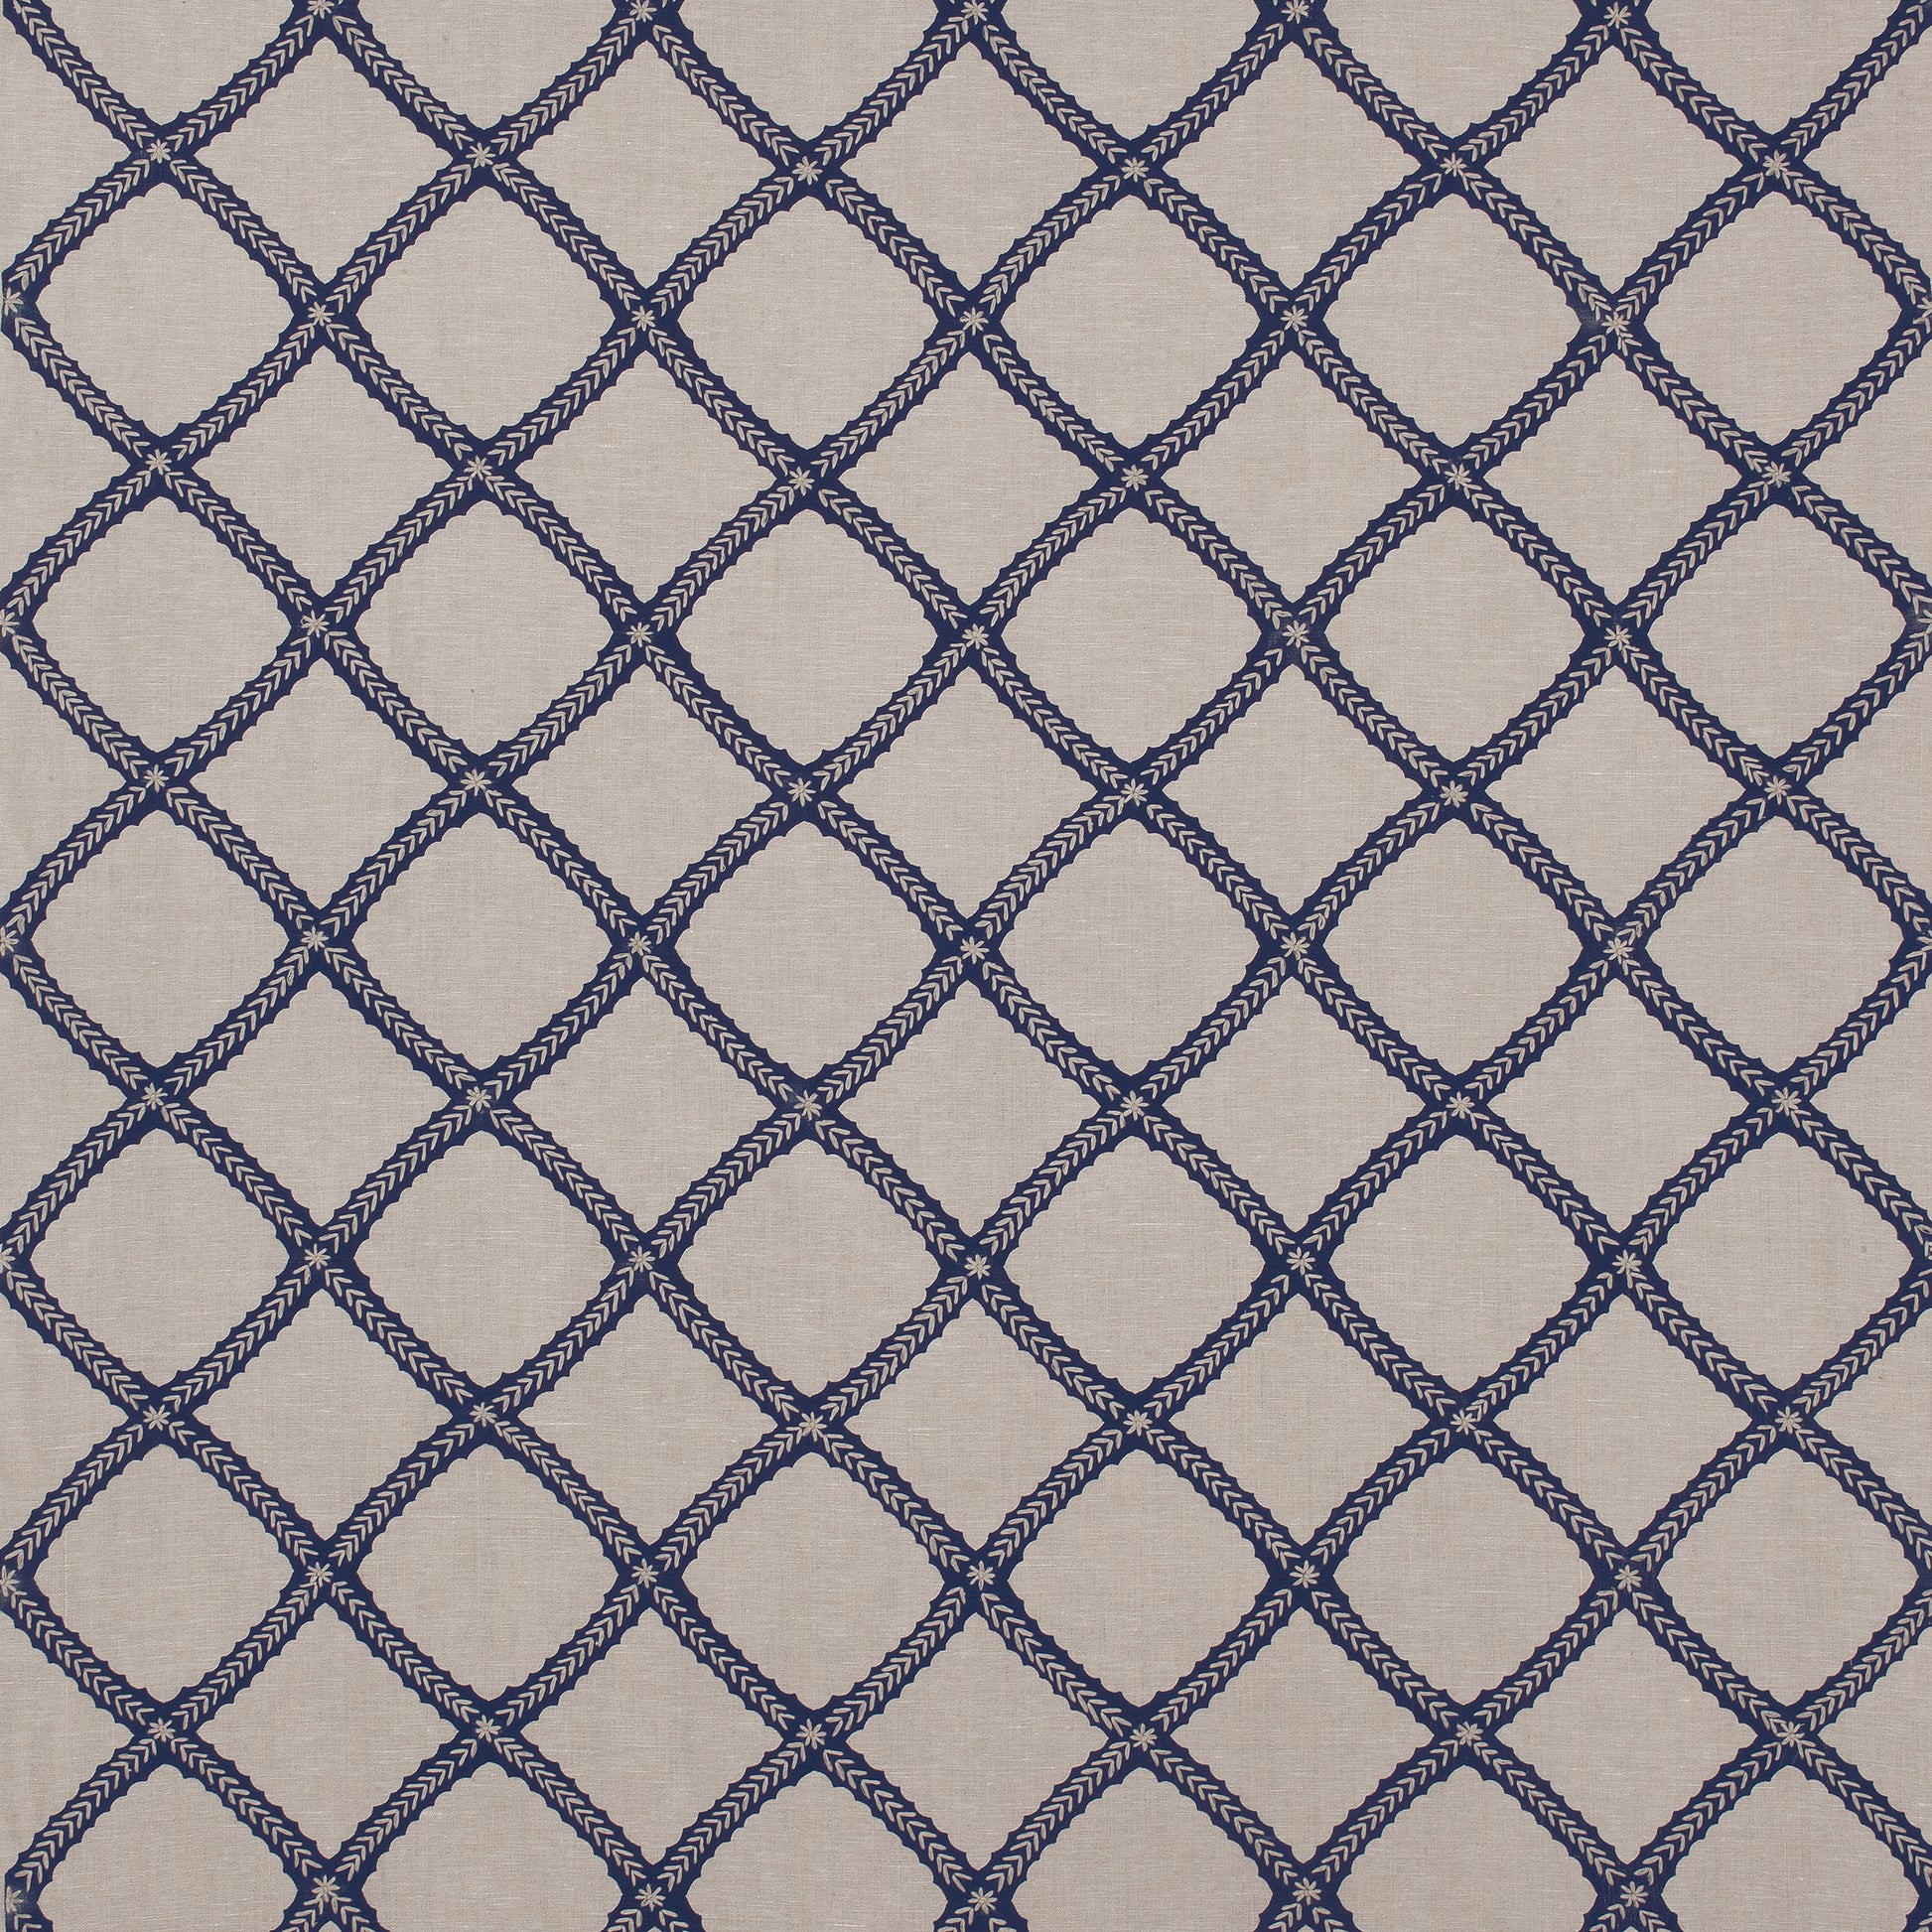 Purchase Thibaut Fabric Pattern number W788707 pattern name Majuli Embroidery color Navy on Flax